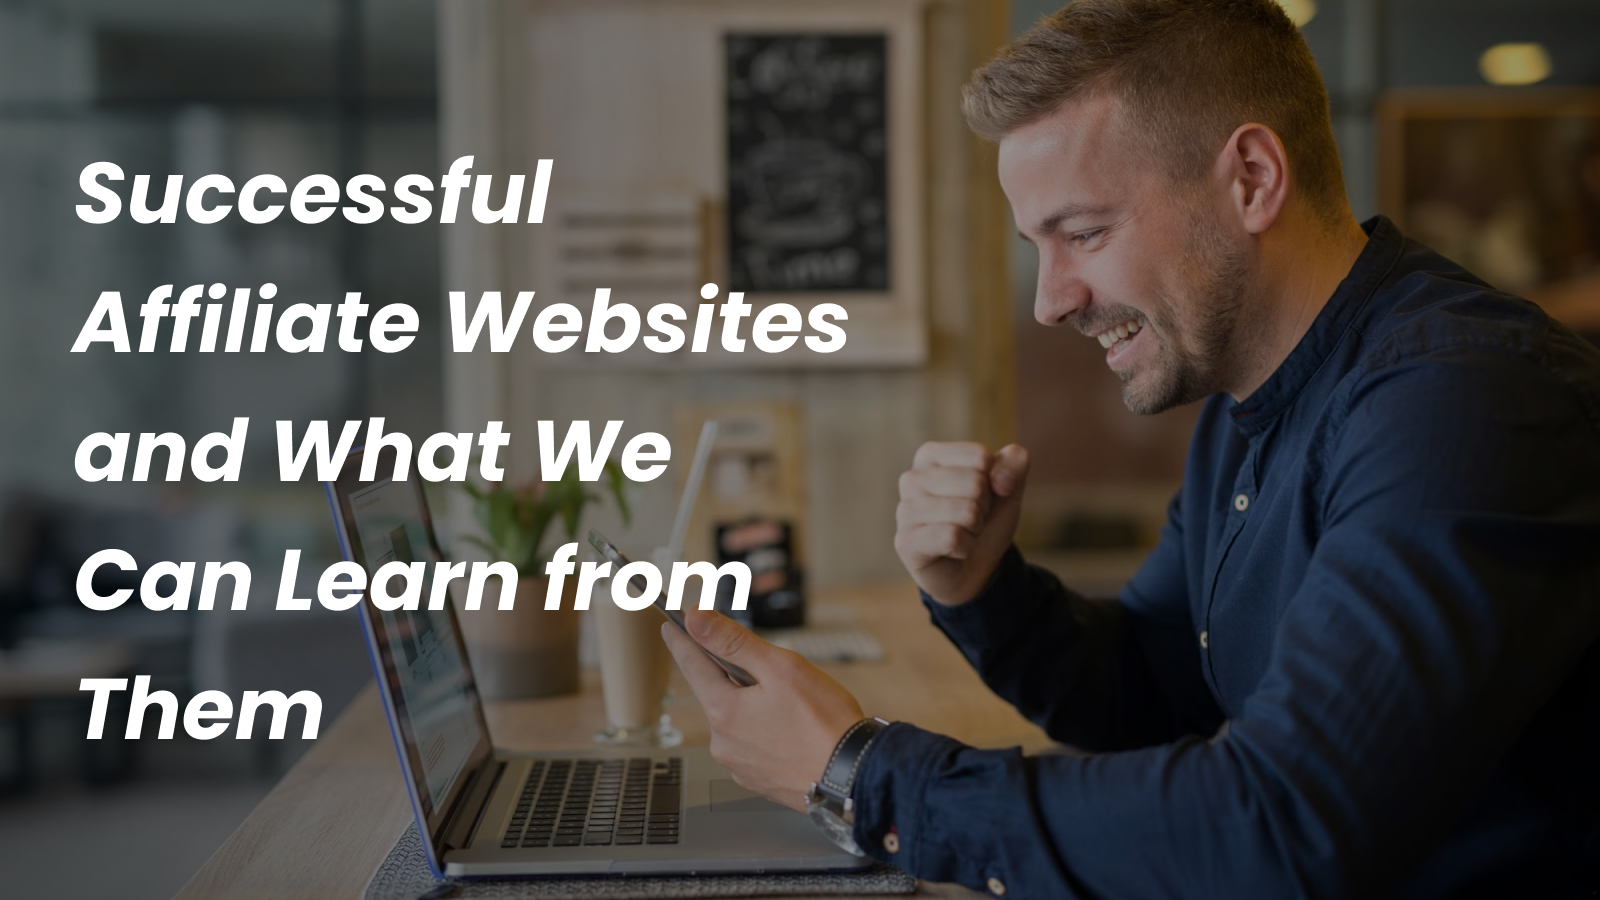 Successful Affiliate Websites and What We Can Learn from Them